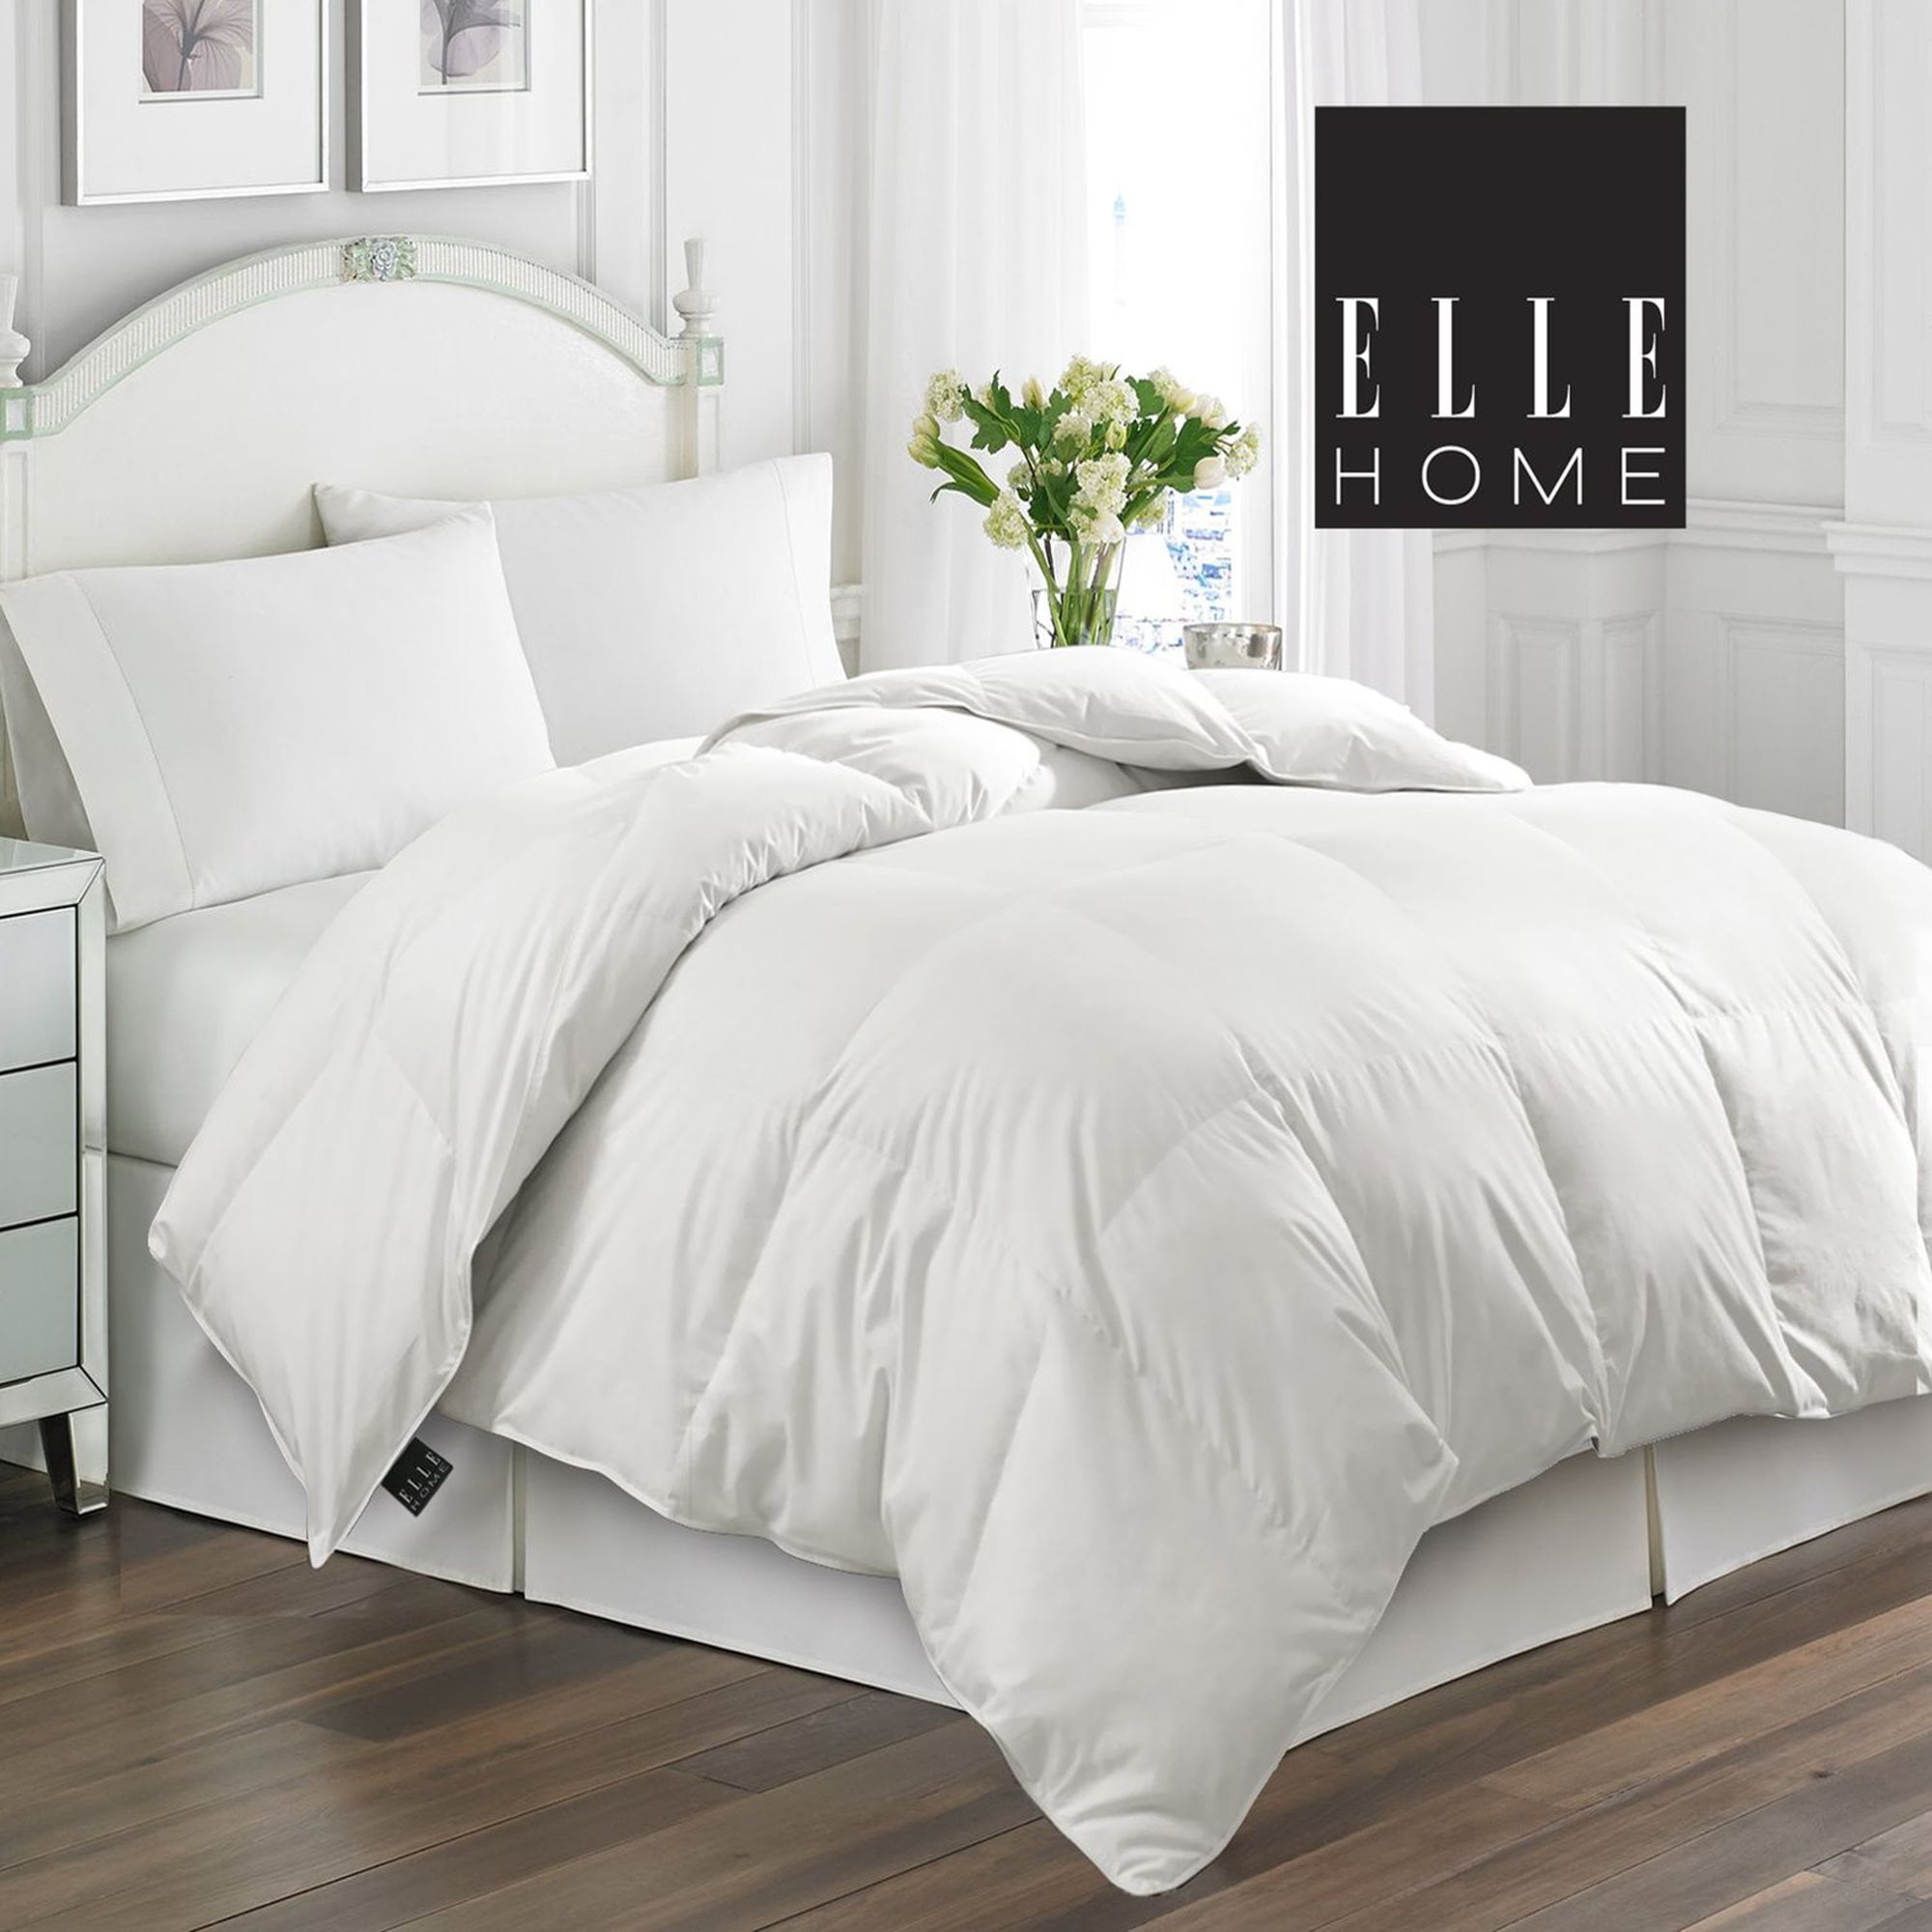 Blue Ridge Elle Home Micro Fiber Solid Cover Stitched White Feather And Down Comforter Full